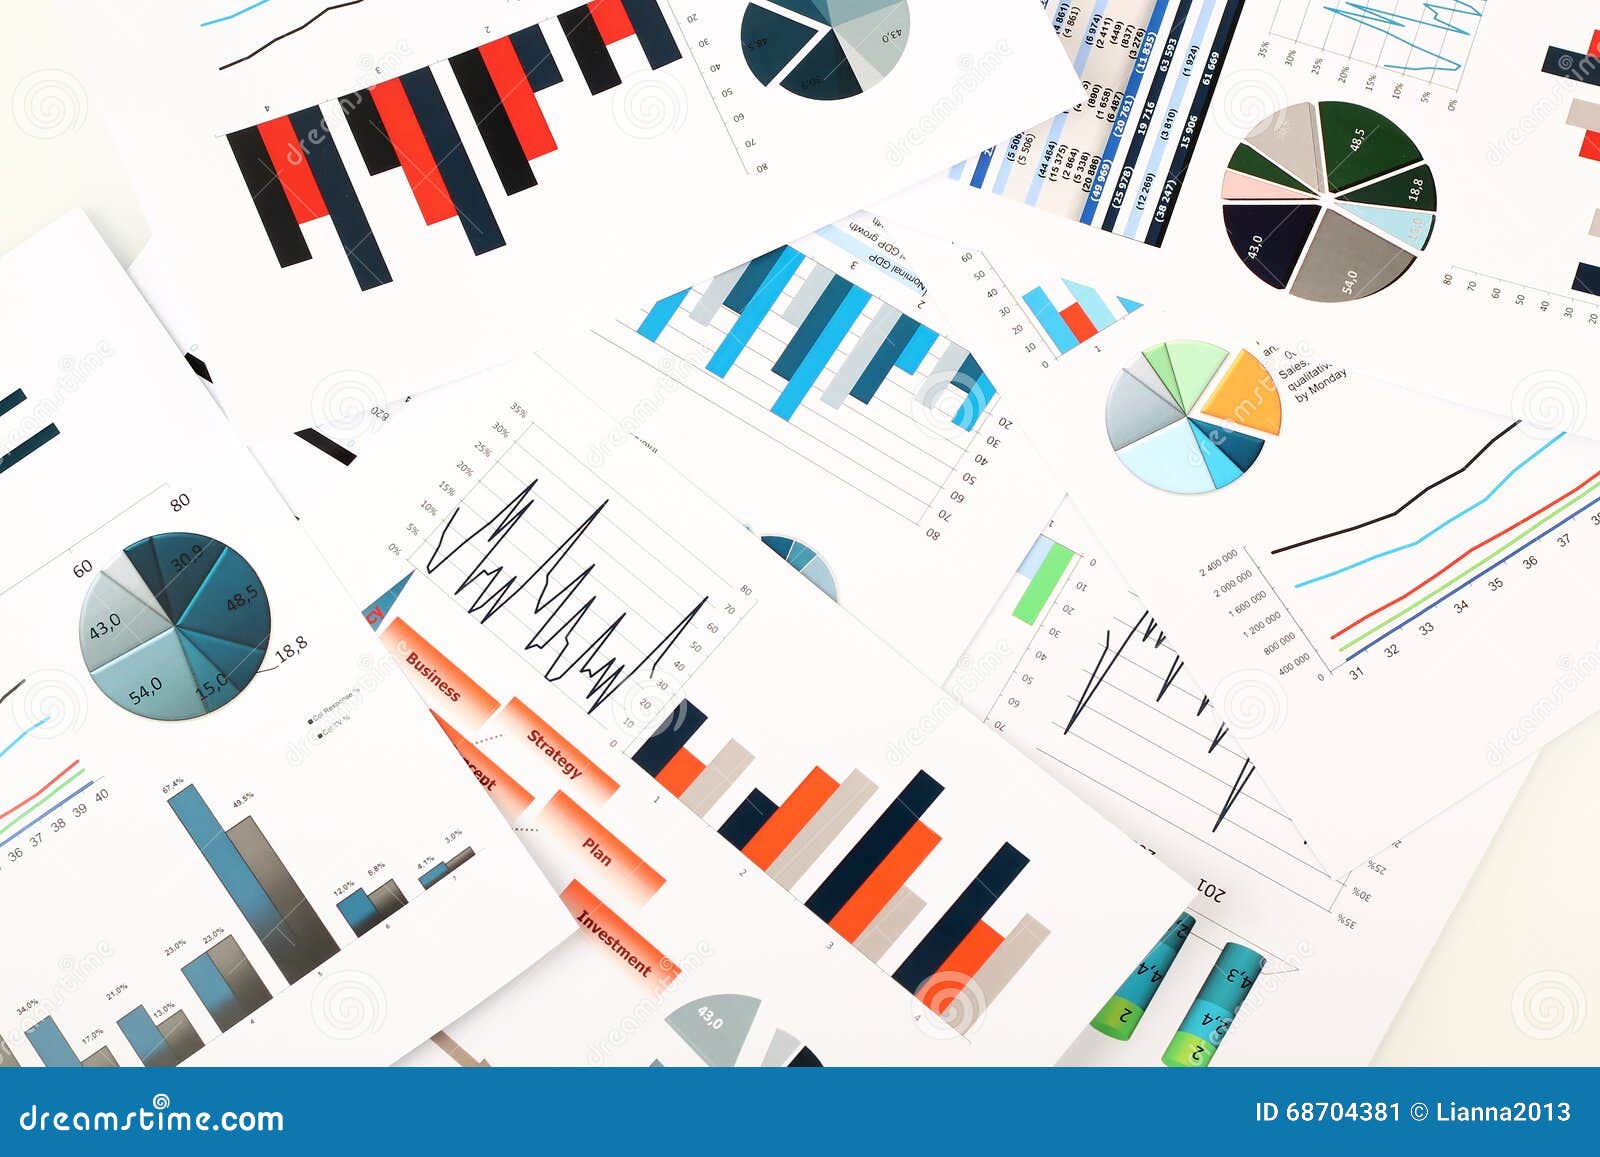 colorful graphs, charts, marketing research and business annual report background, management project, budget planning, financial